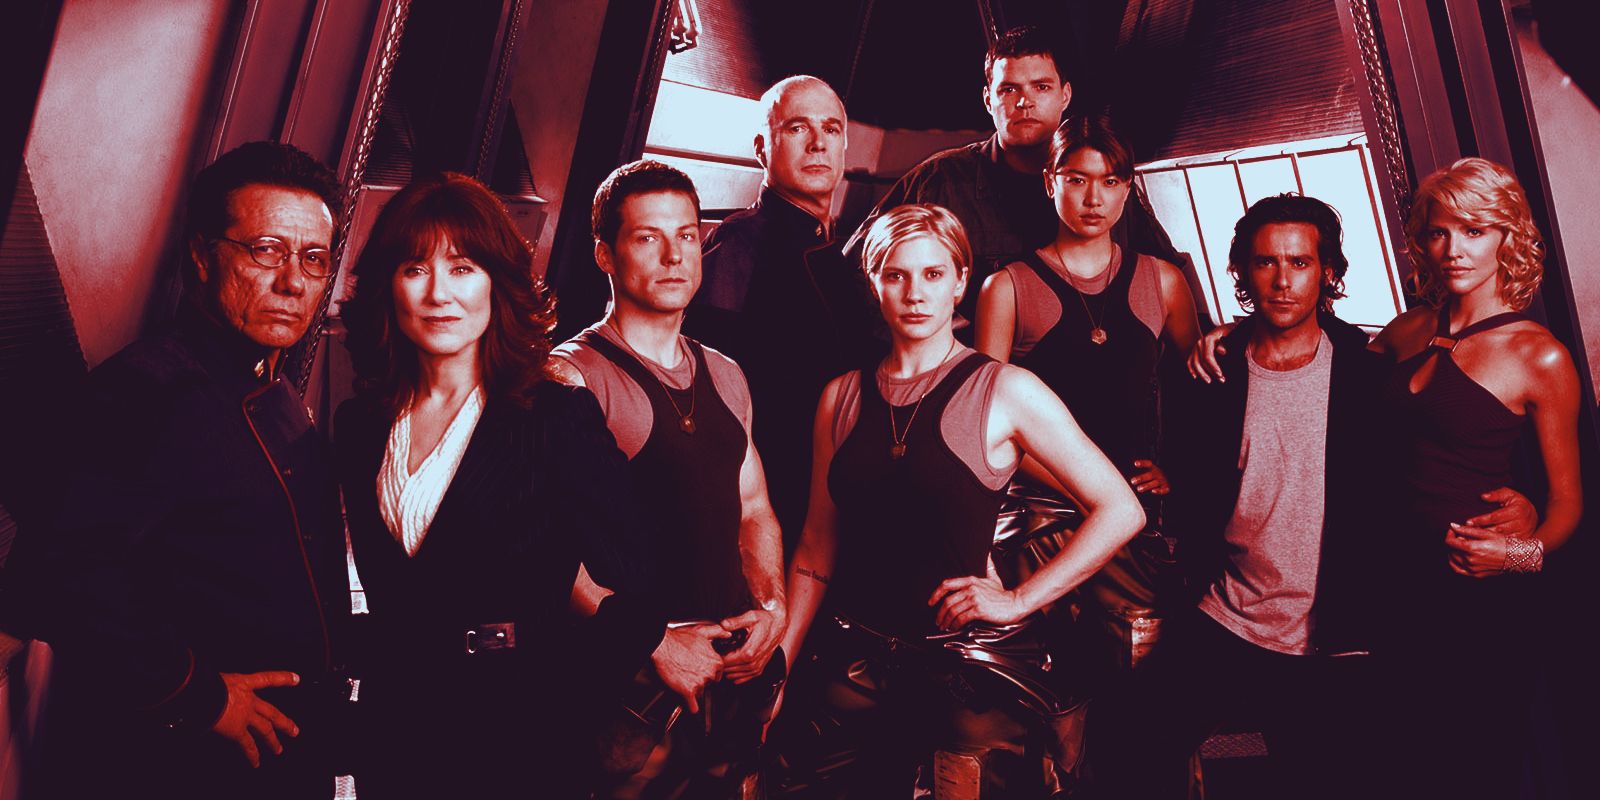 This image shows the Battlestar Galactica cast with a red overlay.